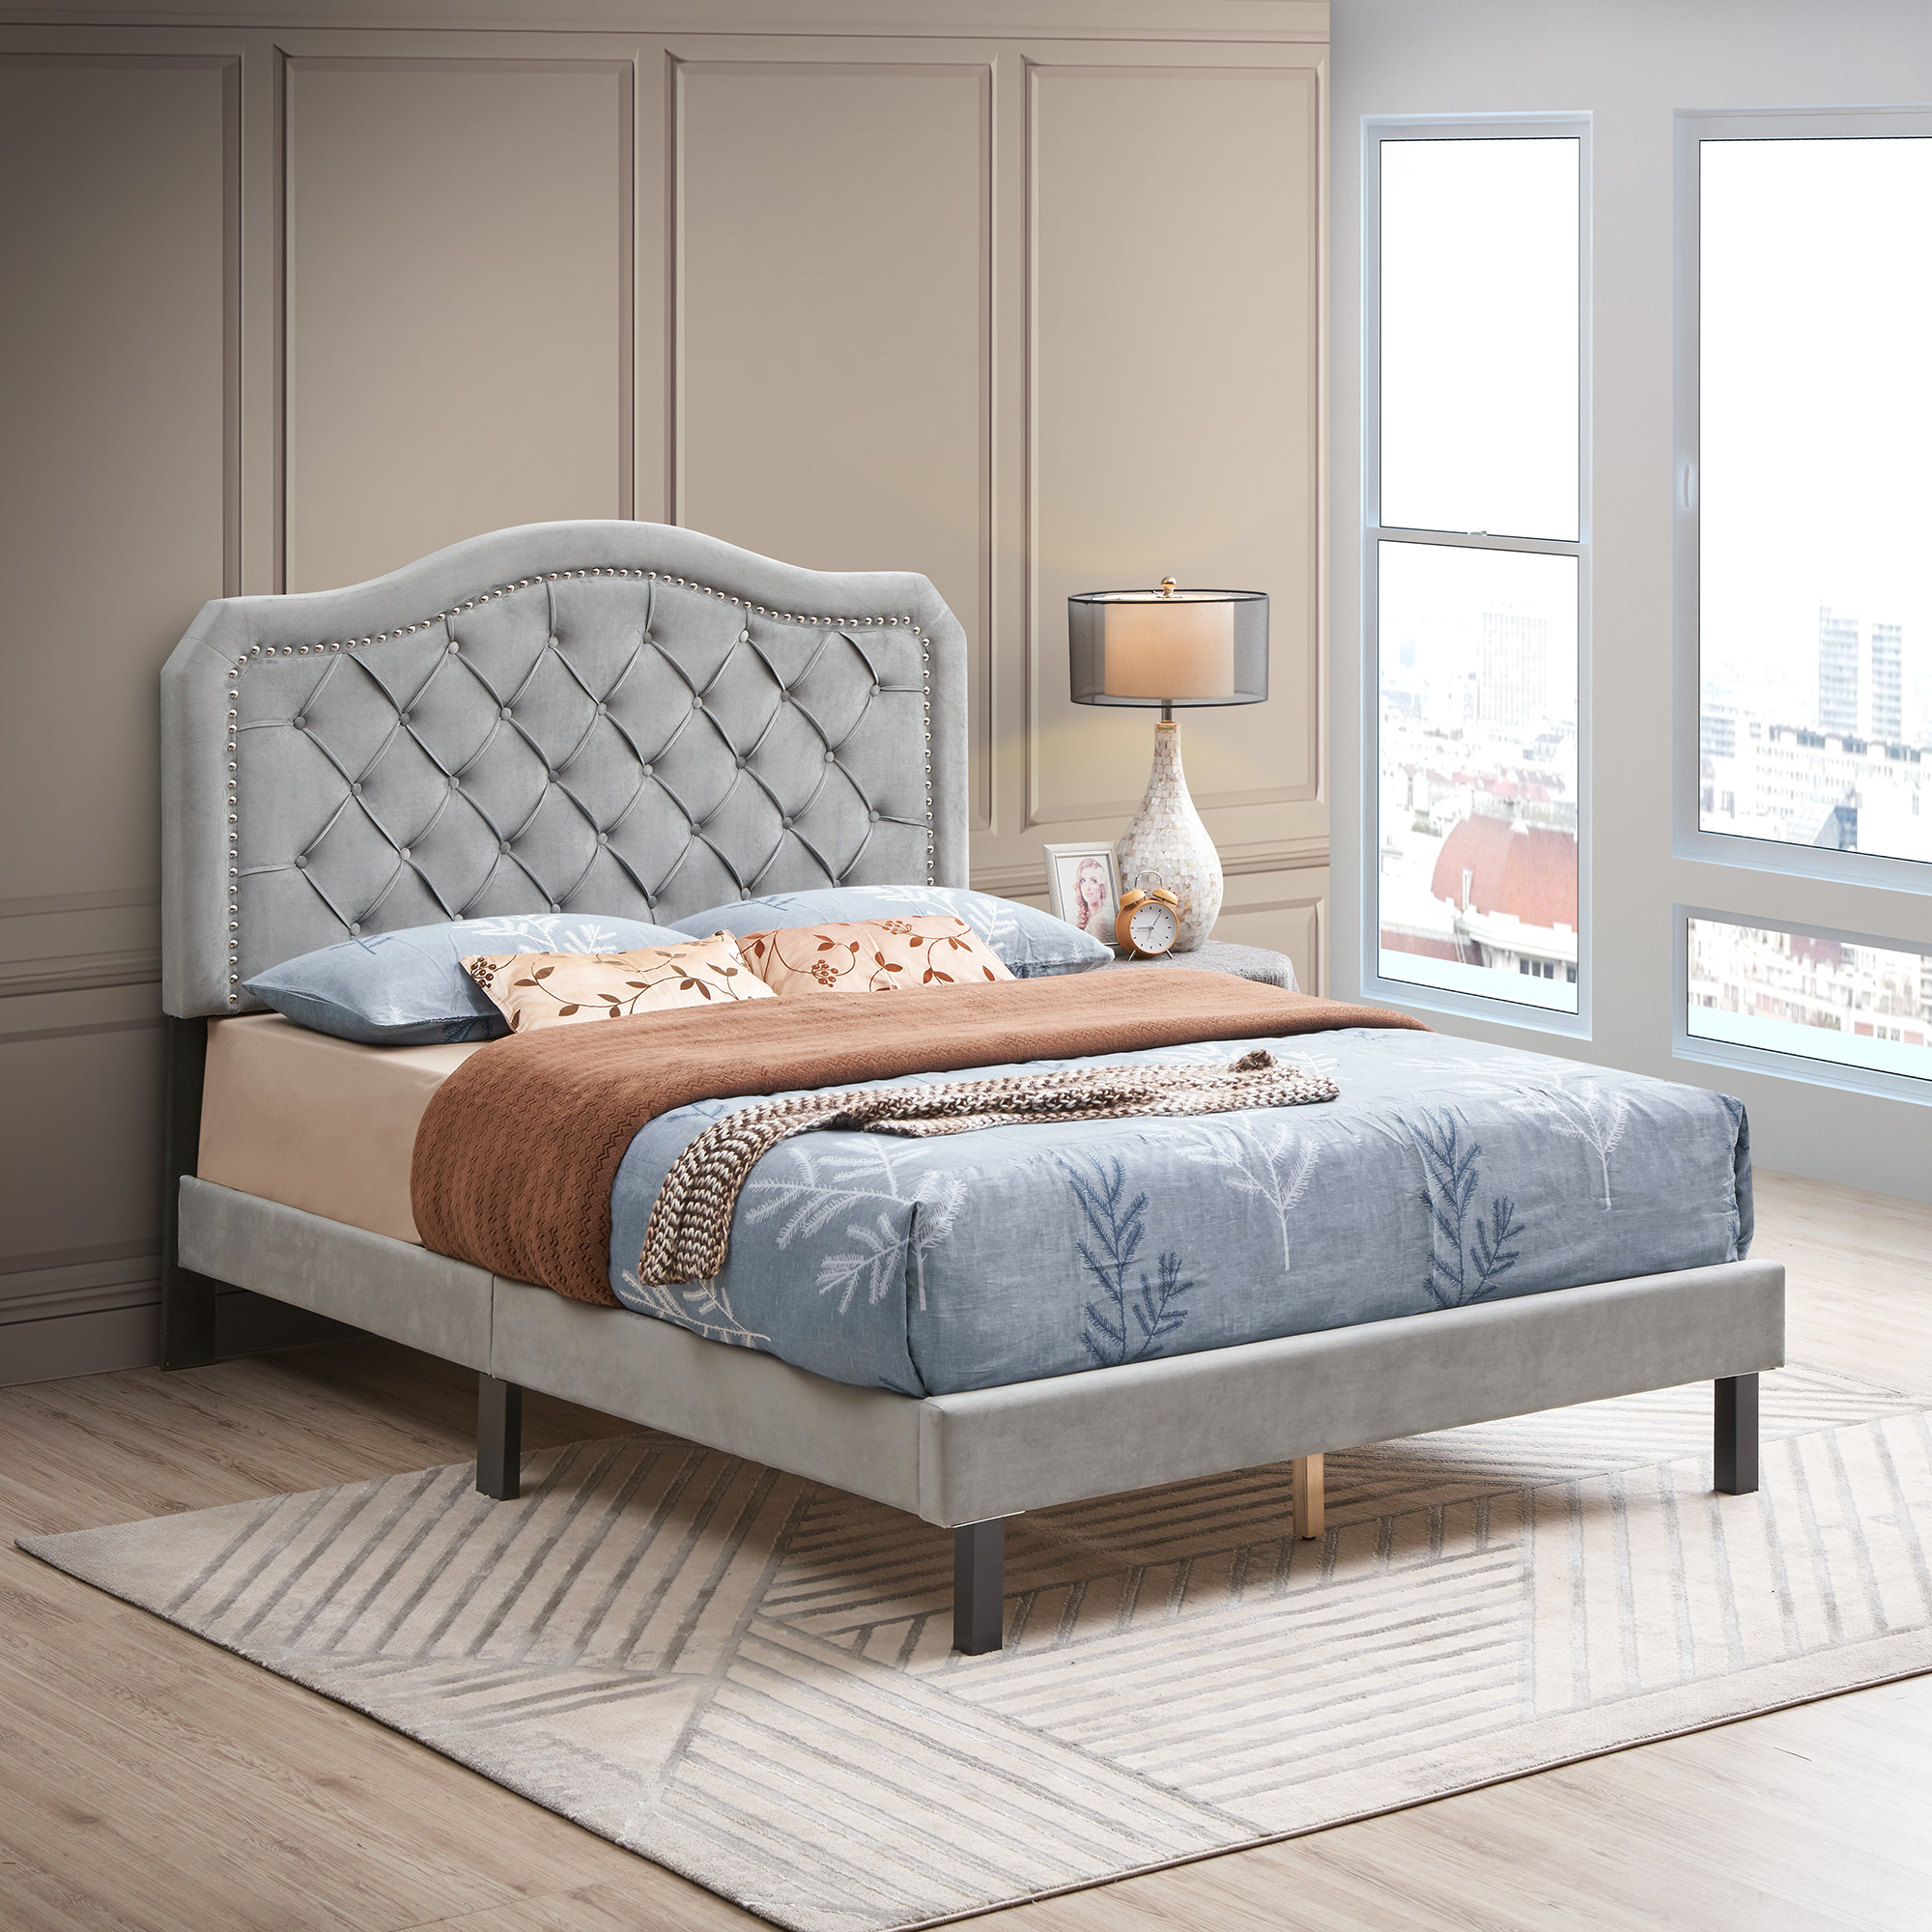 Upholstered Bed Button Tufted with Curve Design - Strong Wood Slat Support - Easy Assembly - Gray Velvet - platform bed - Queen-CASAINC